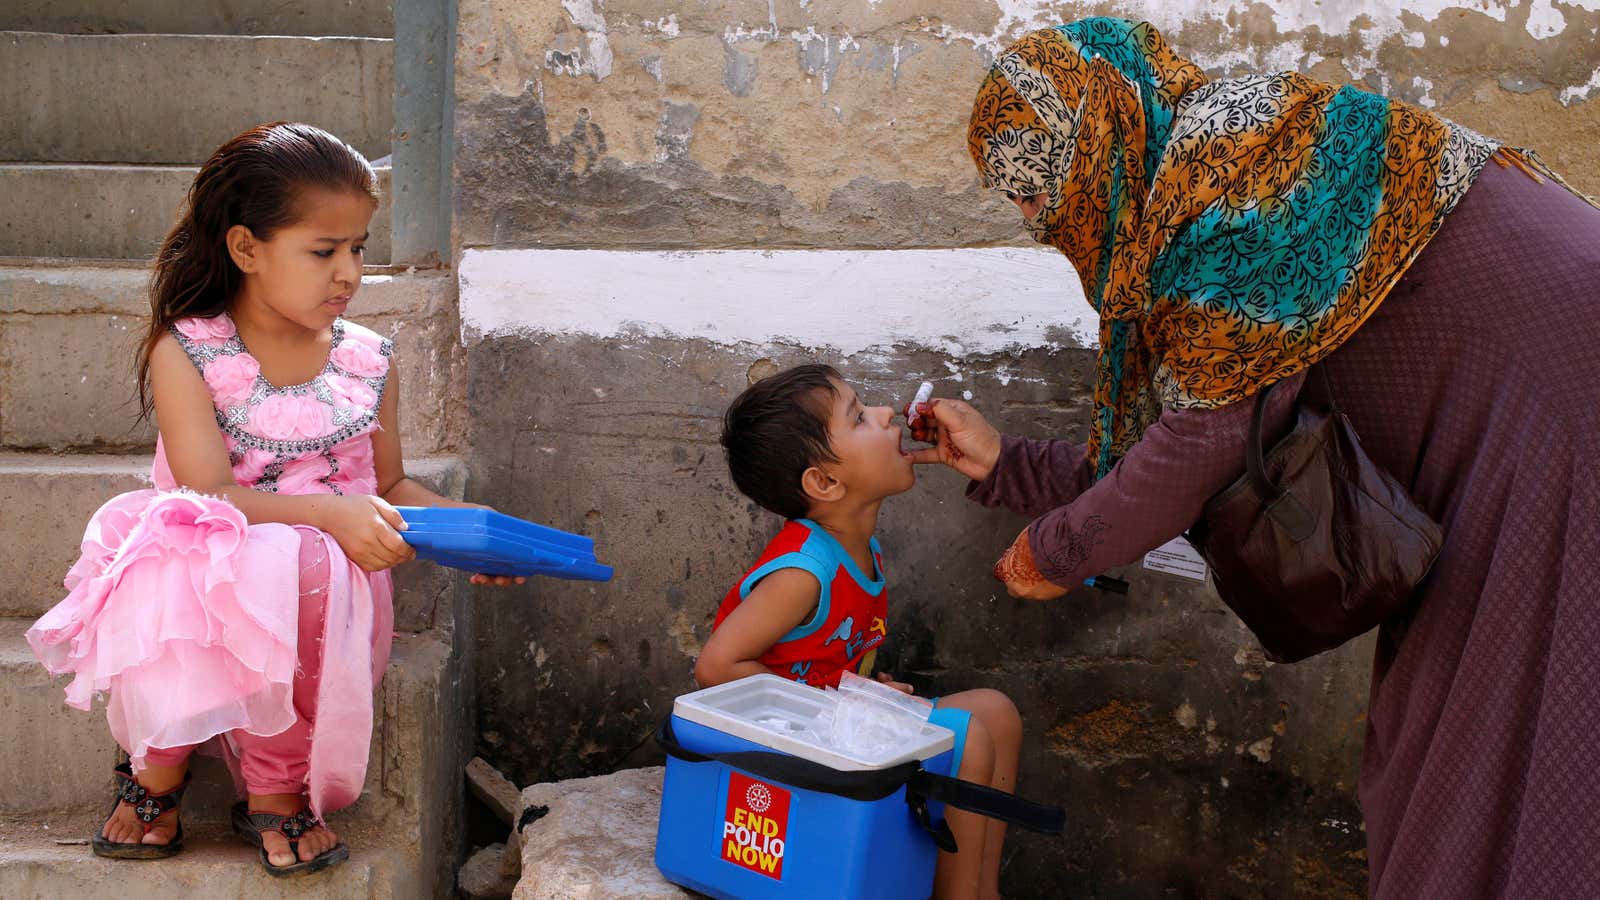 Polio is one of WHO’s ongoing global public health emergencies.